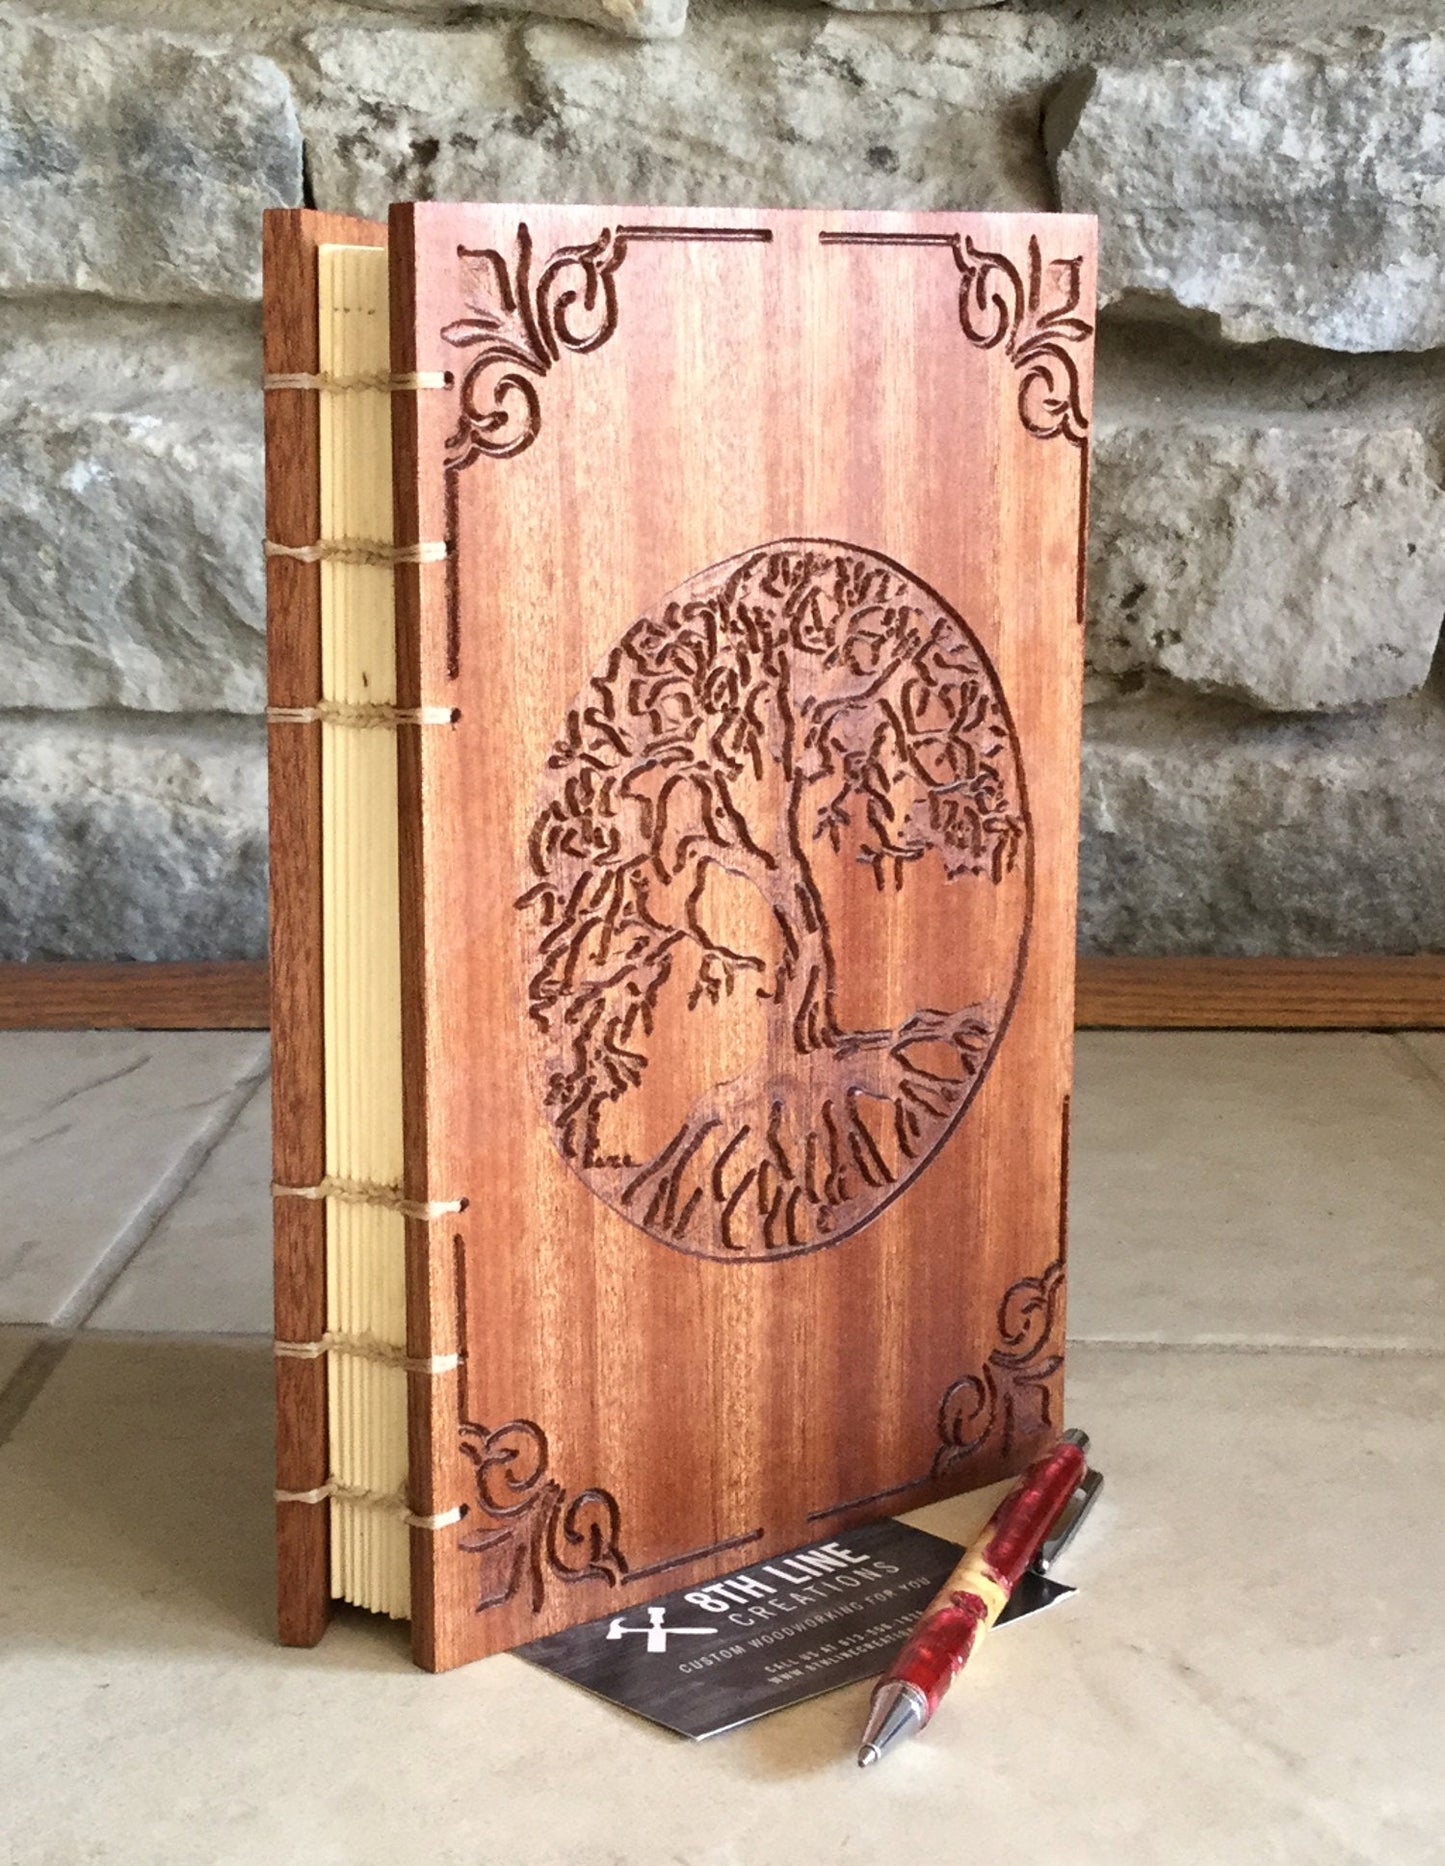 Notebook / diary Journal - Quill Pen Graphic - Padauk Custom Carved Diaries, Guest Books, Journals and Notebooks 8th Line Creations 